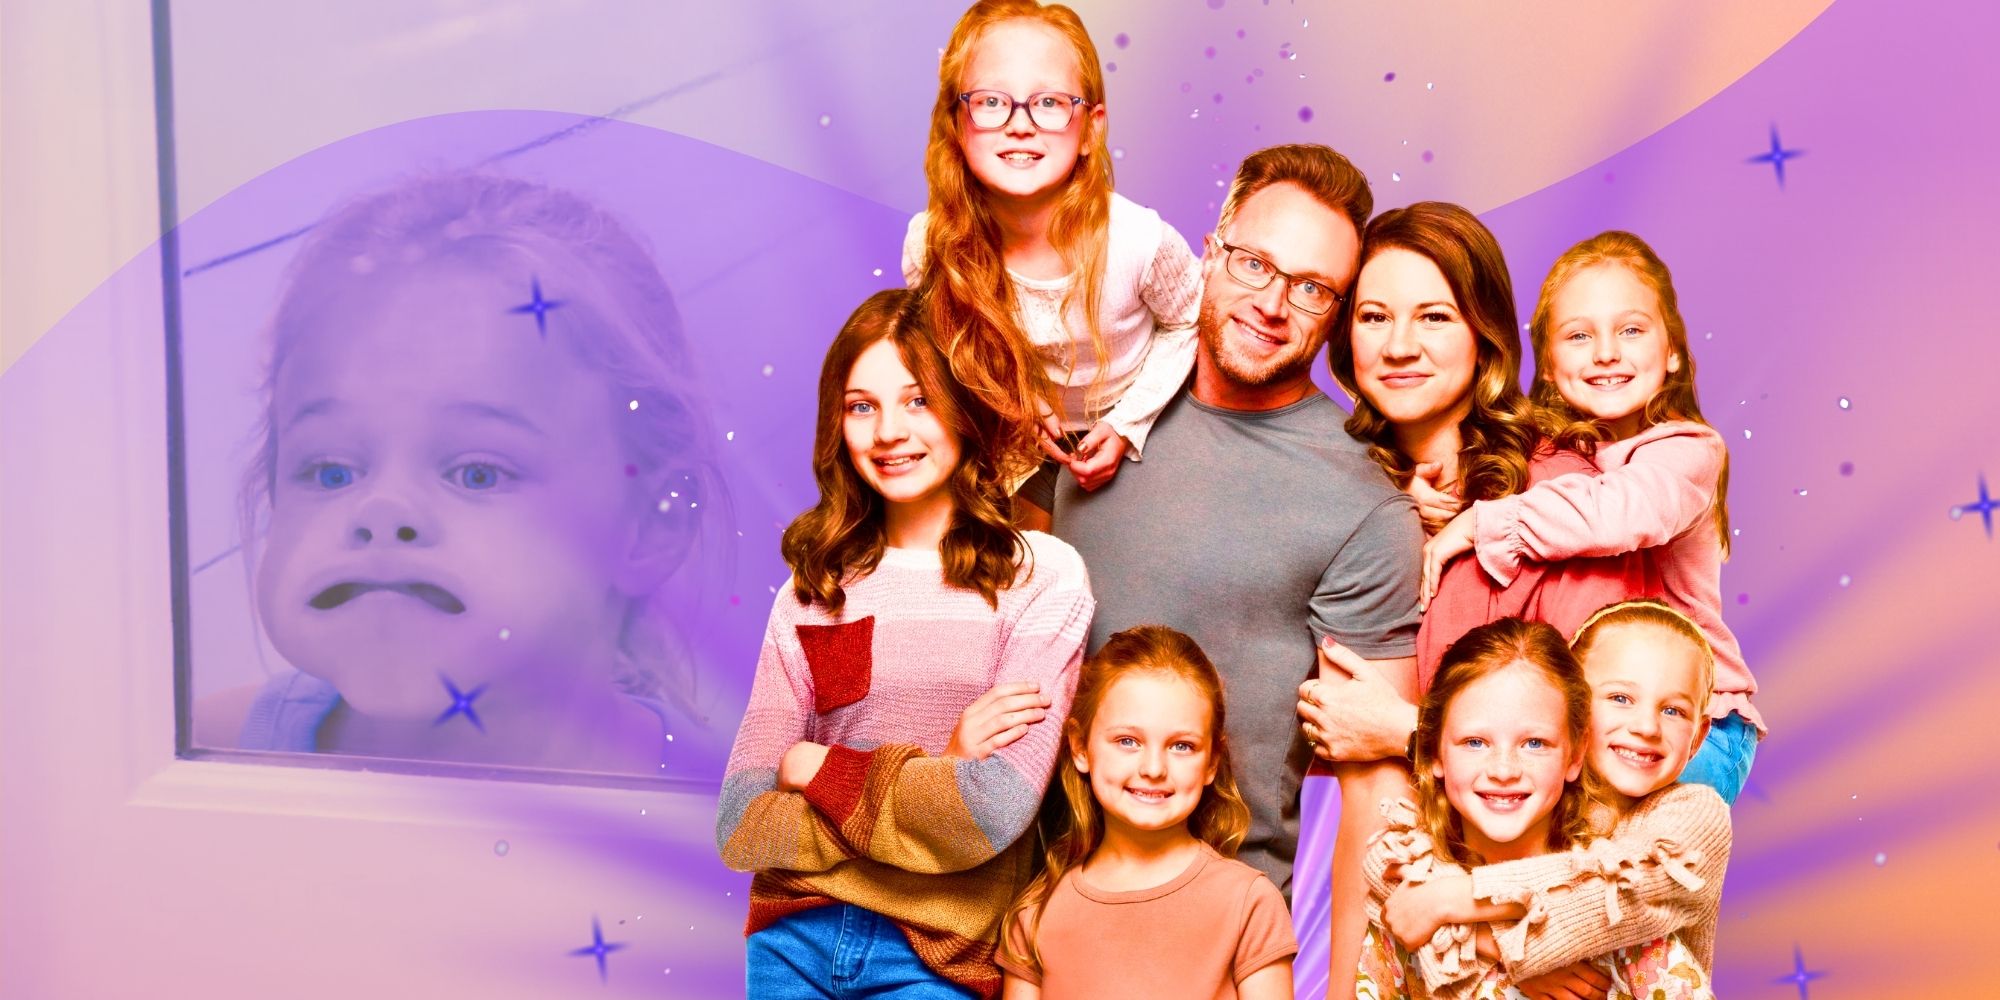 OutDaughtered Season 10 cast